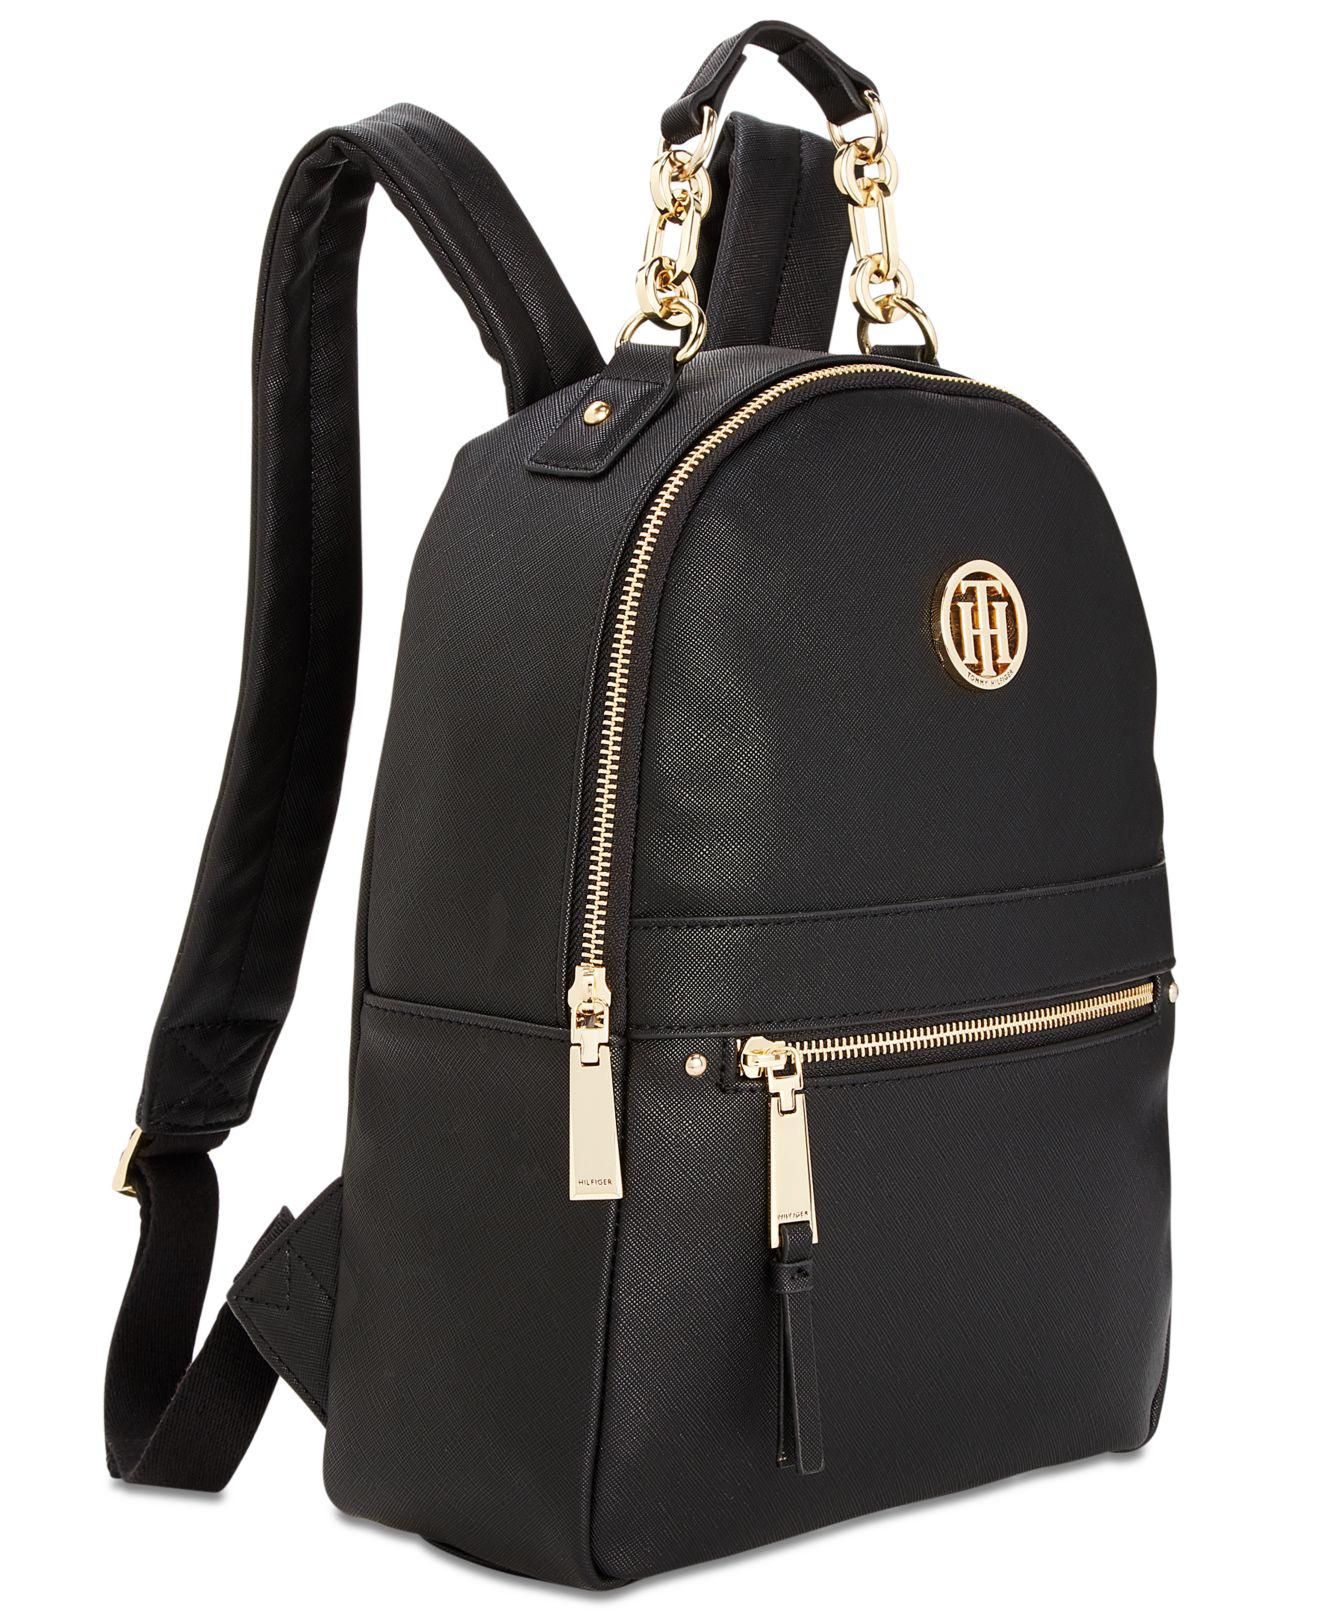 Lyst - Tommy Hilfiger Charming Textured Small Backpack in Black